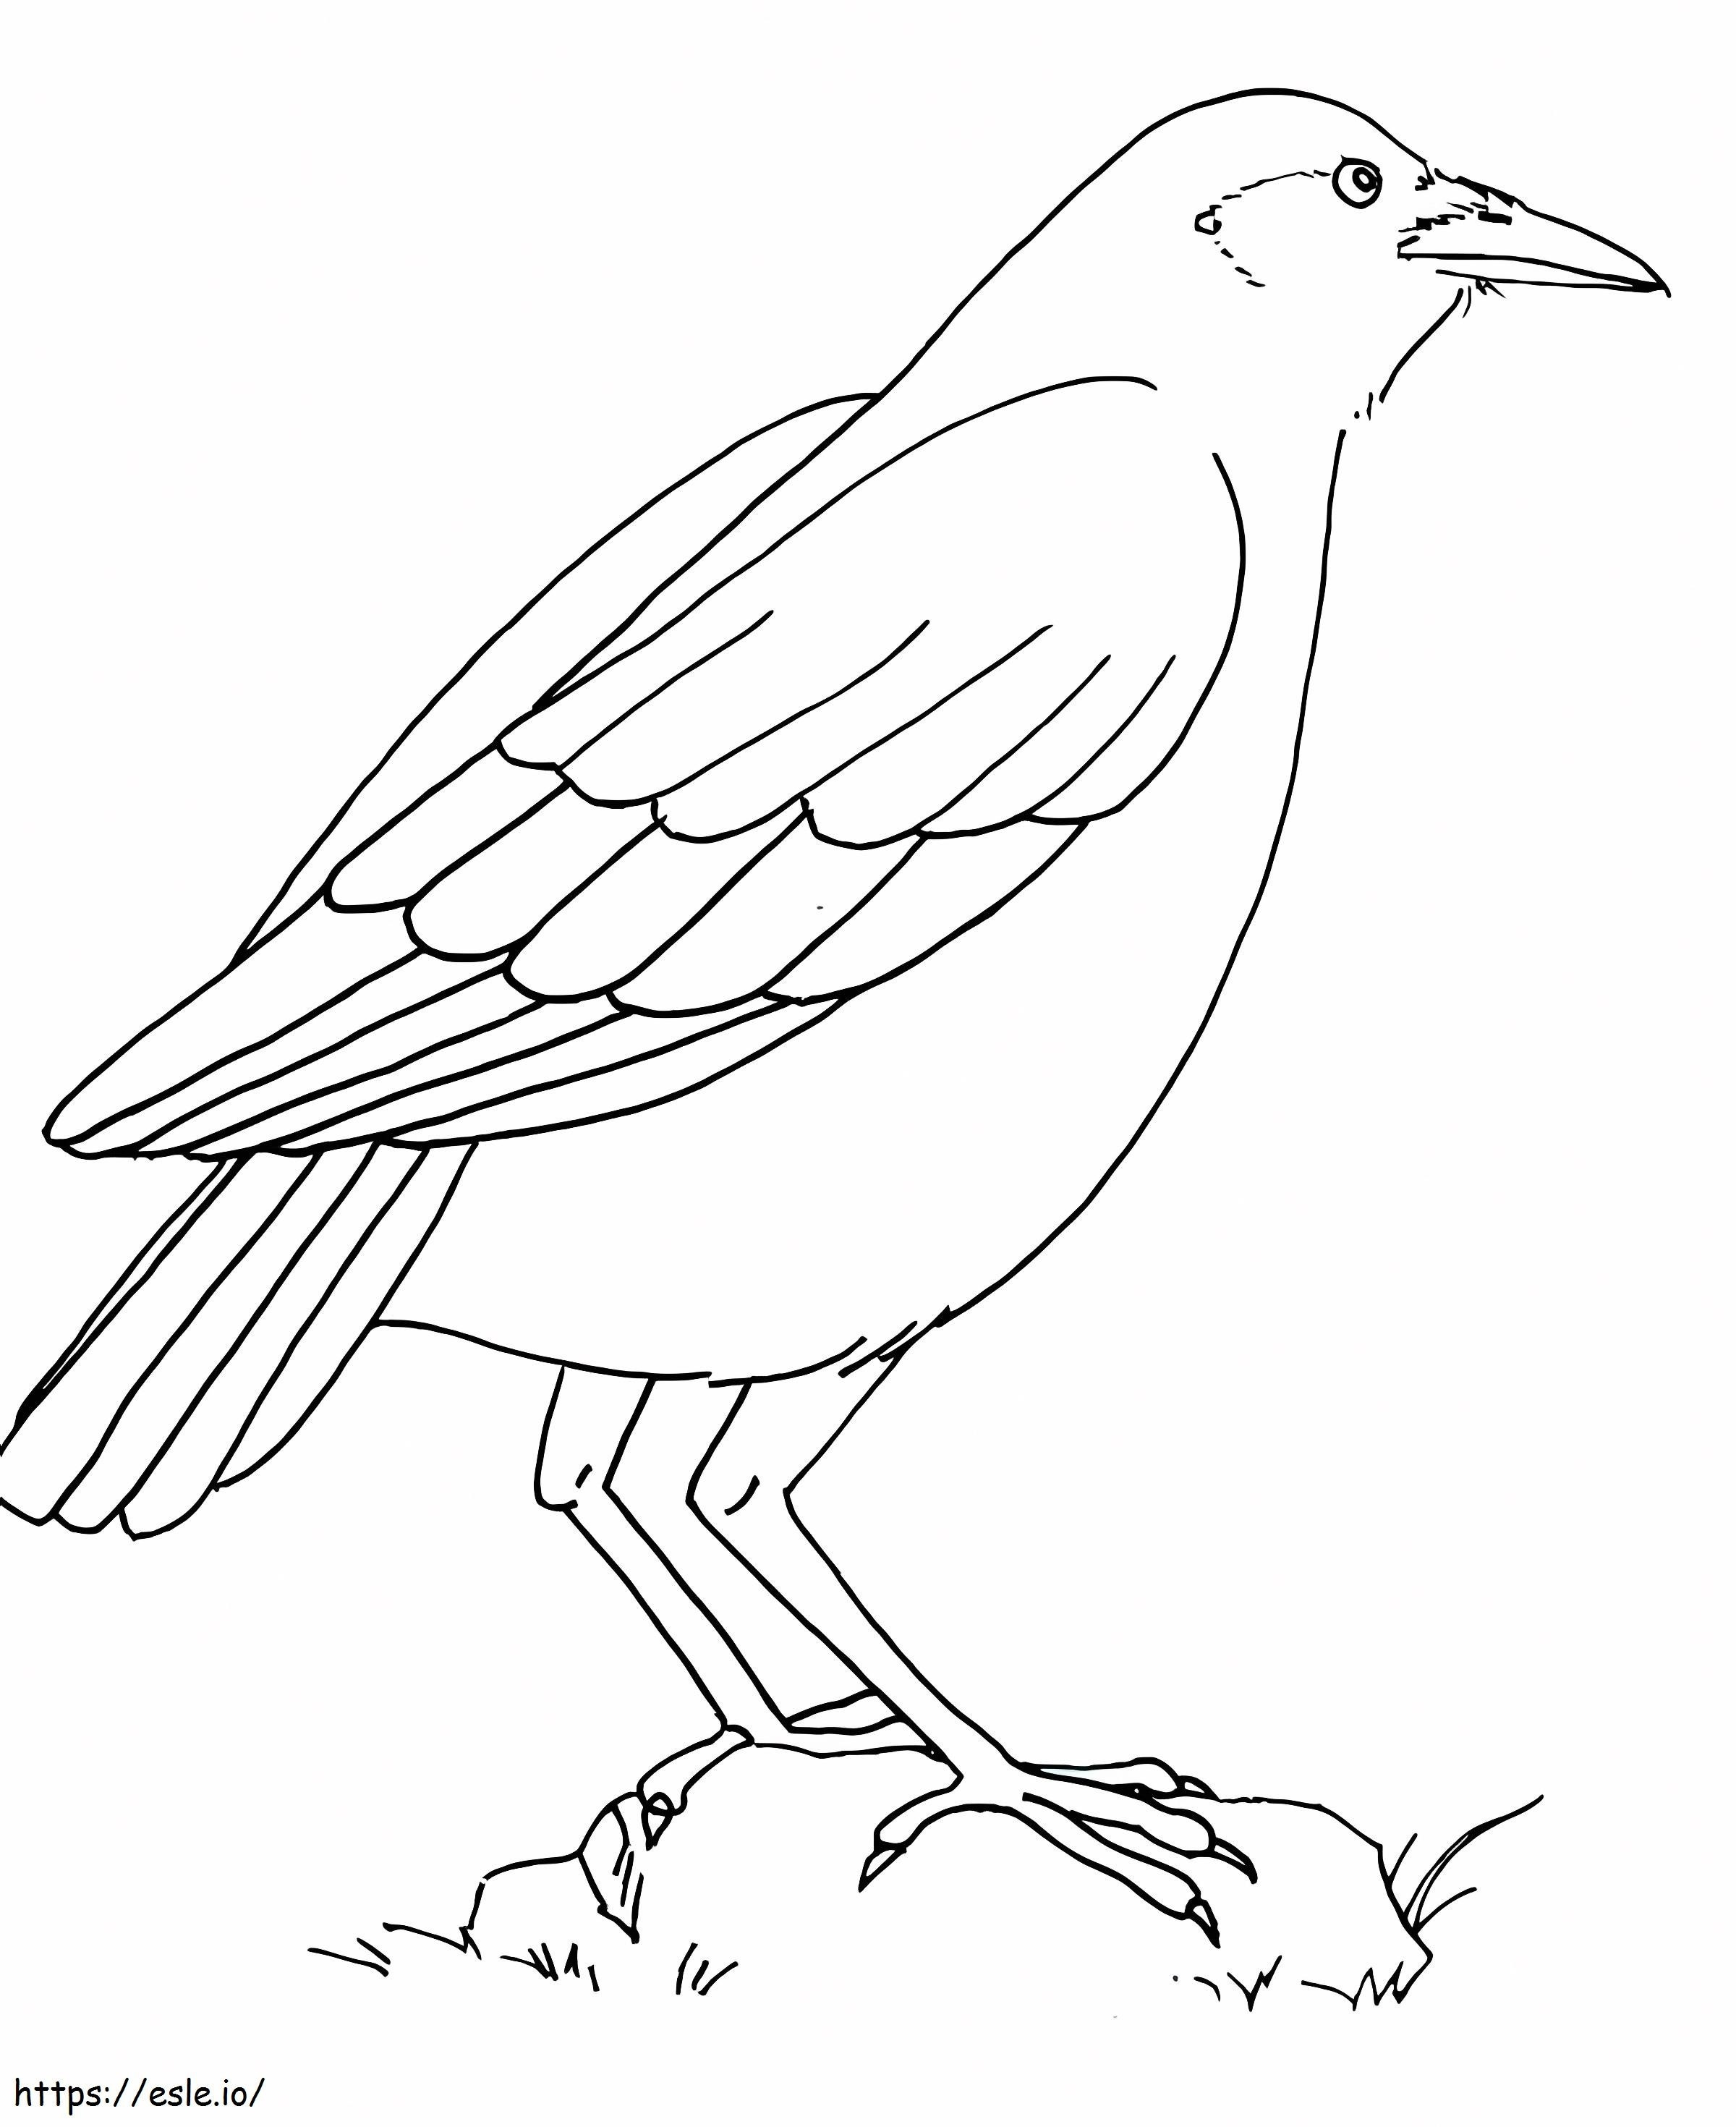 Raven Standing On A Rock coloring page